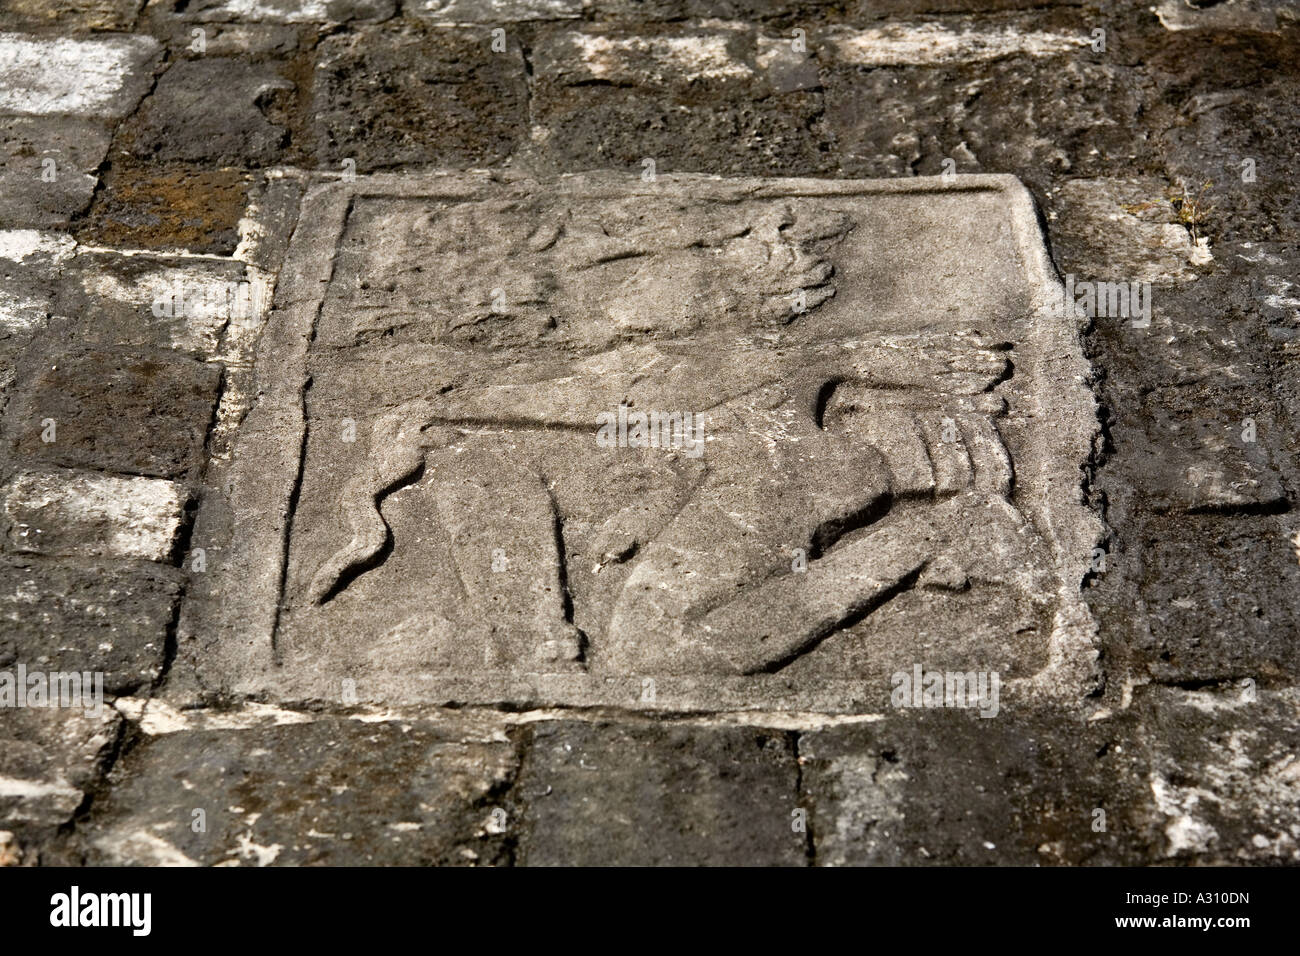 A graphic stone carving at the Ball Court at the ruined Mayan city of Coba in Mexico Stock Photo